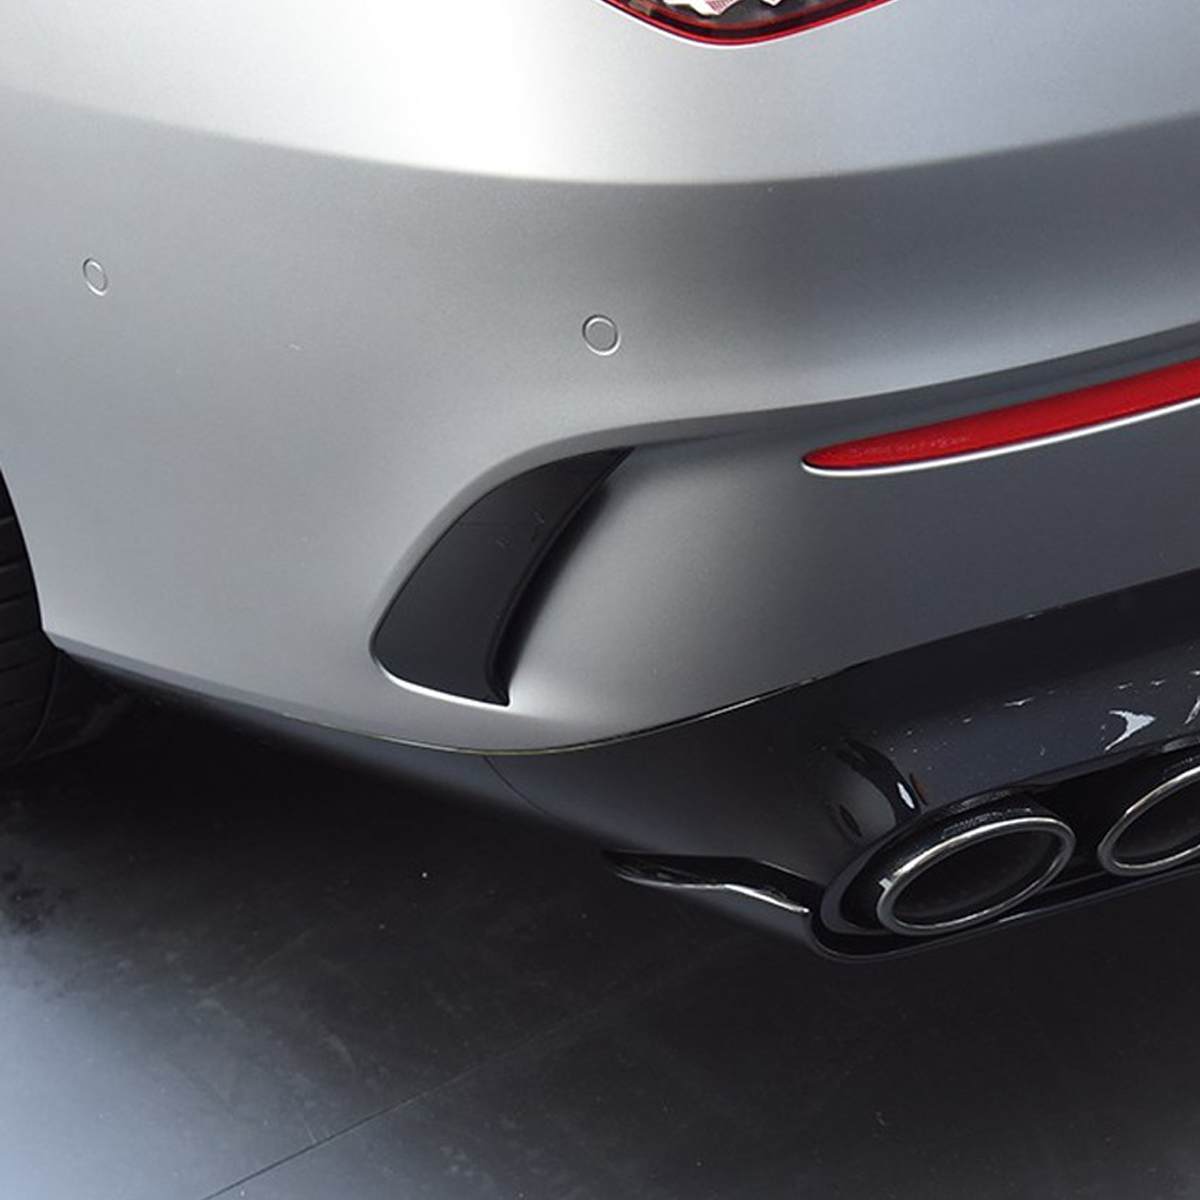 Mercedes Benz CLA-Class/CLA35 (C118) AMG Style Carbon Fibre Rear Bumper Canards - Manufactured from 100% Carbon Fibre, this product is the perfect addition to your CLA model with an easy fitment with the double-sided tape supplied. This product quickly enhances your CLA Class with added depth with the polished resin finish over natural carbon fibre. 